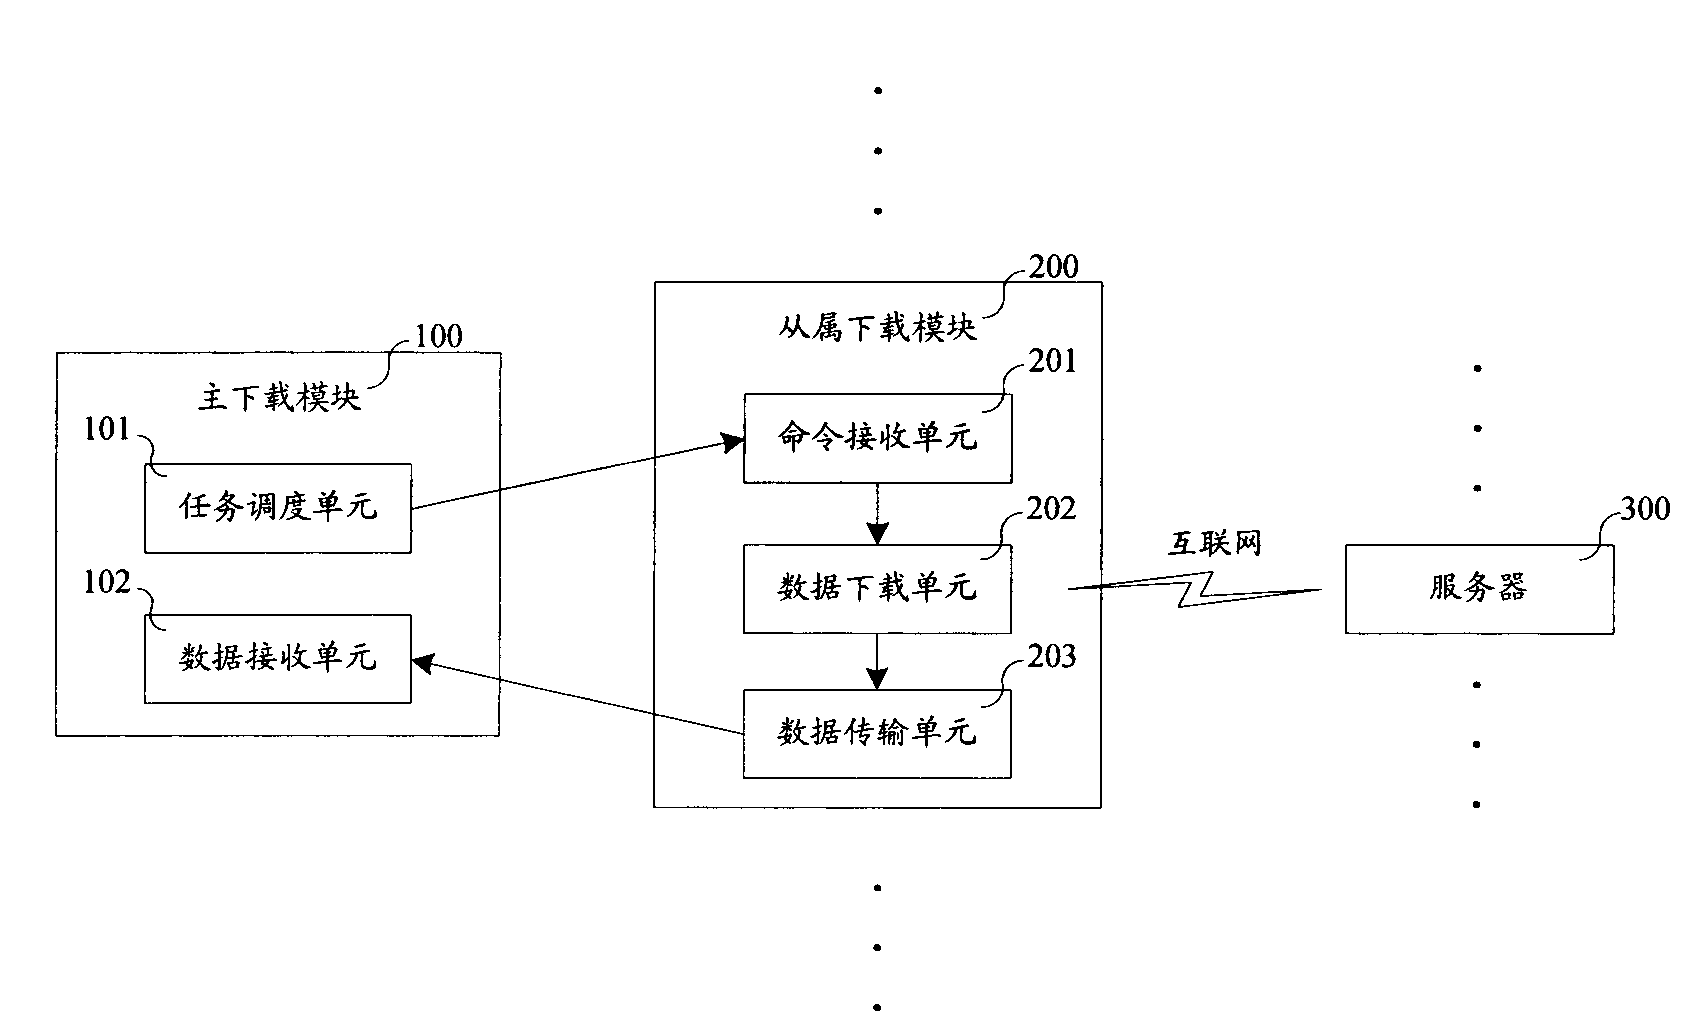 Local area network downloading device and method based on multiple collaborators